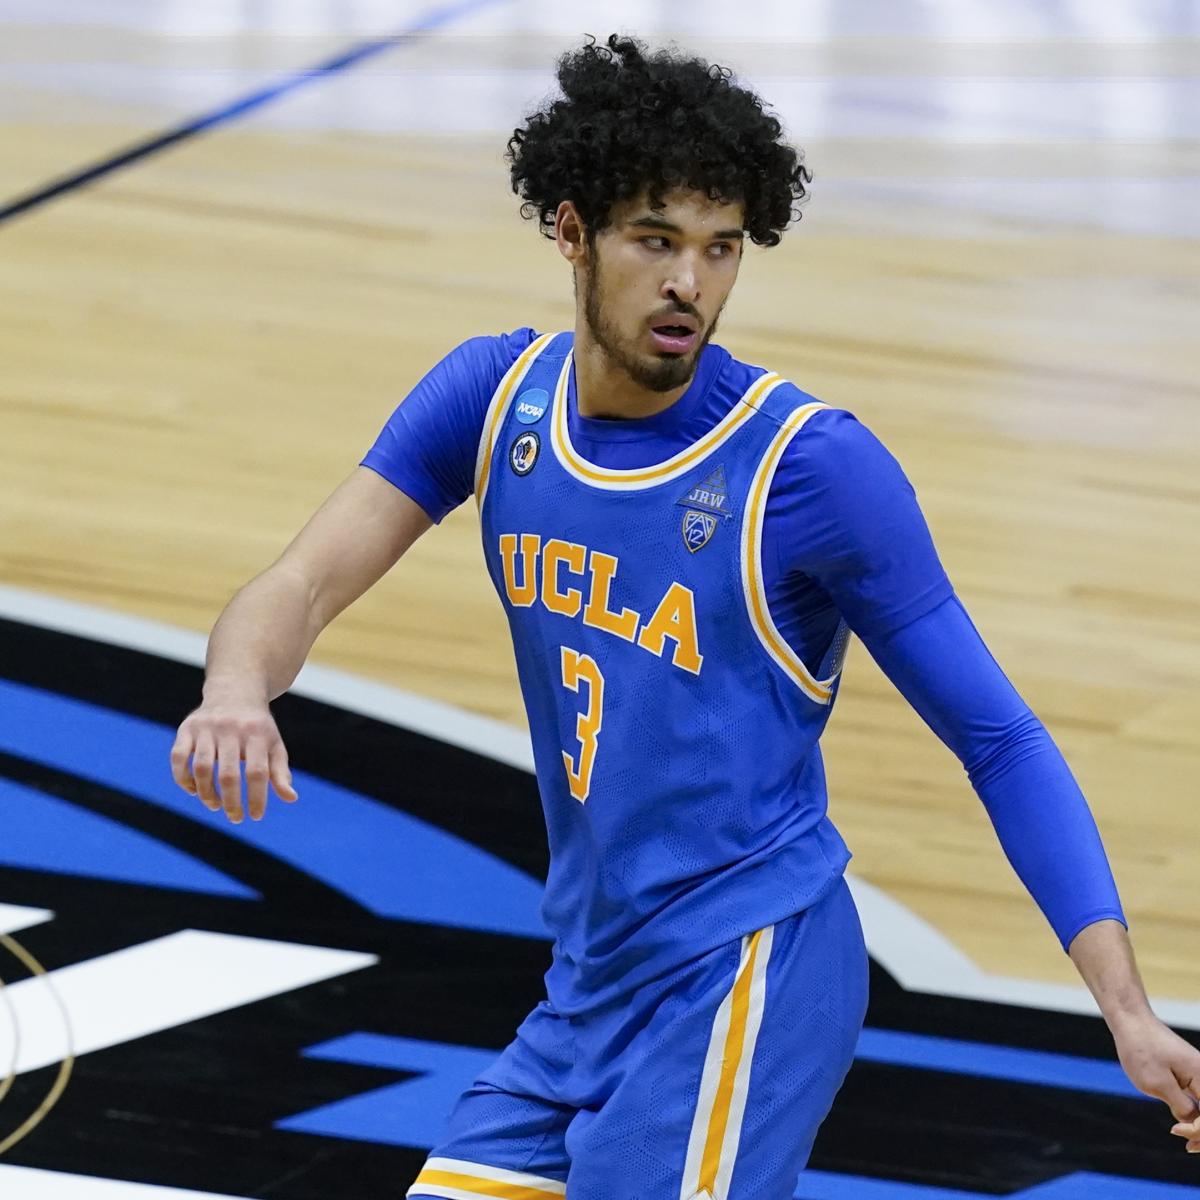 UCLA's Juzang could be first Asian American NBA lottery pick